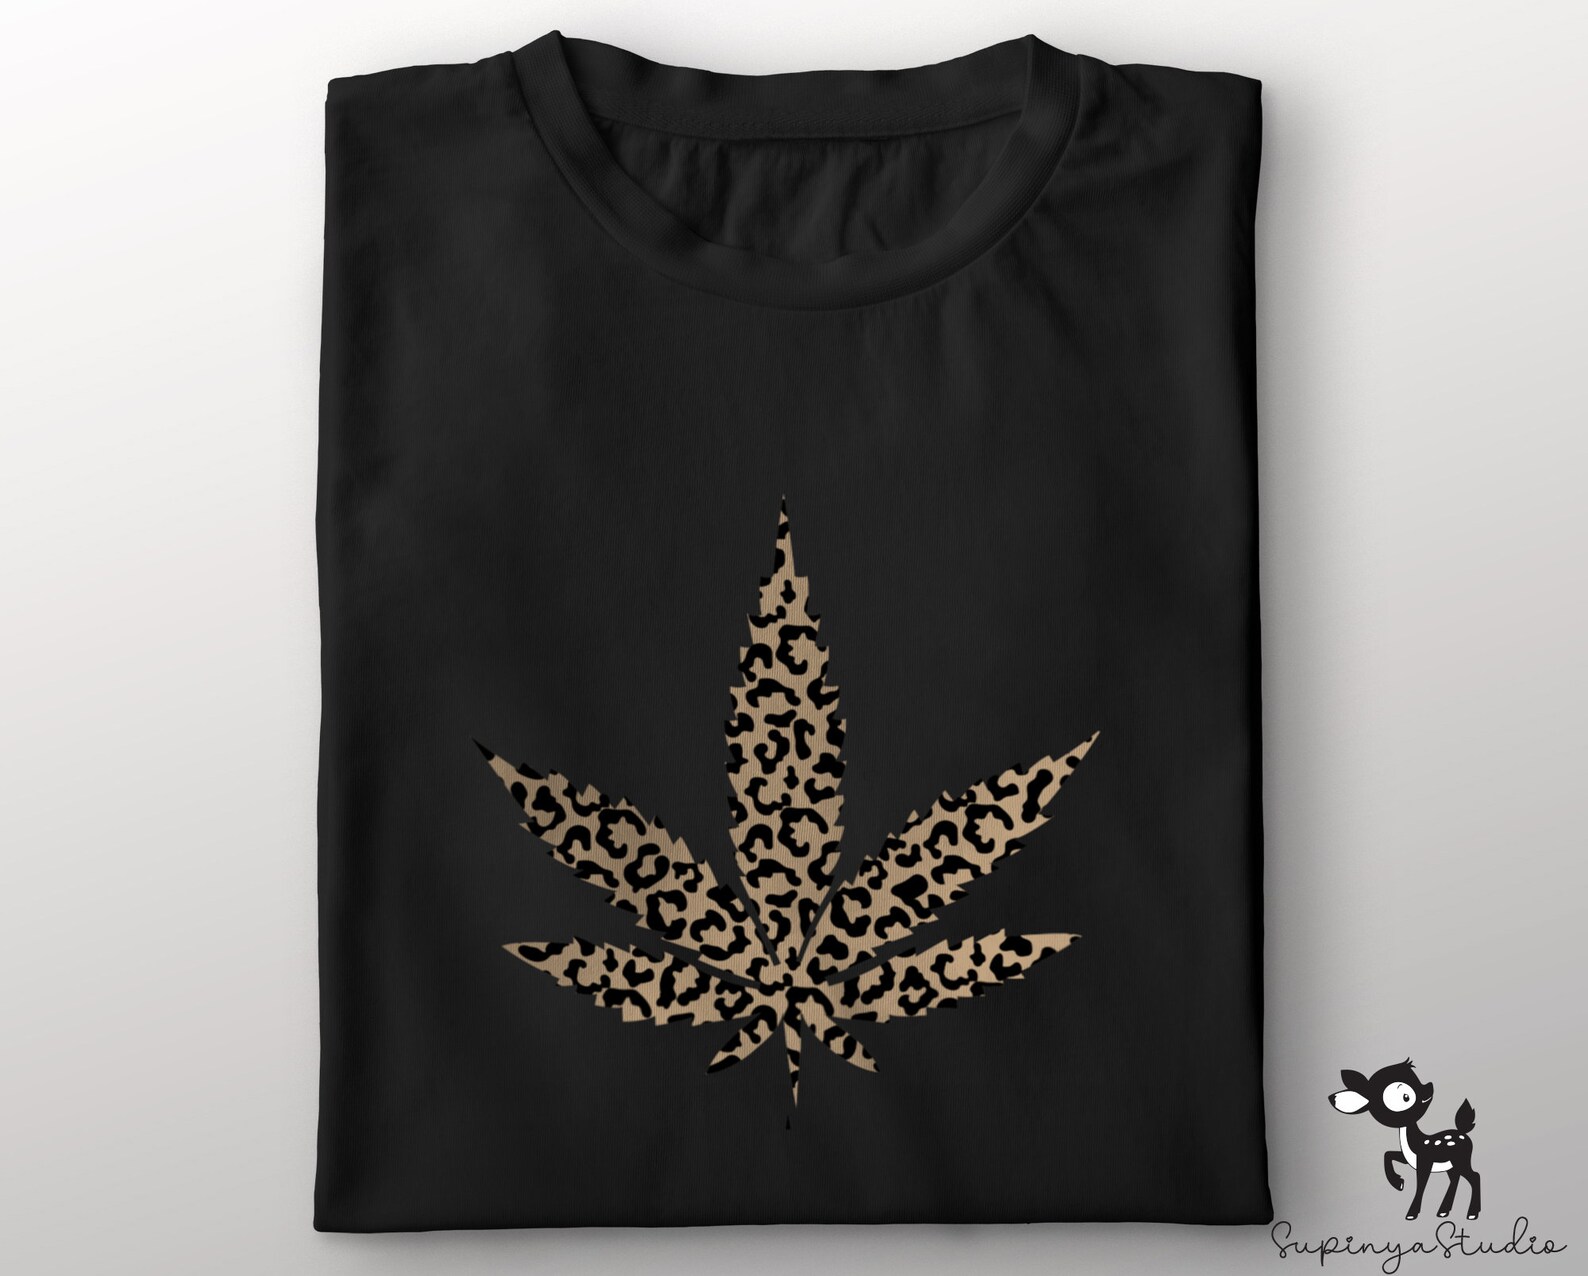 Black t-shirt with leopard weed.